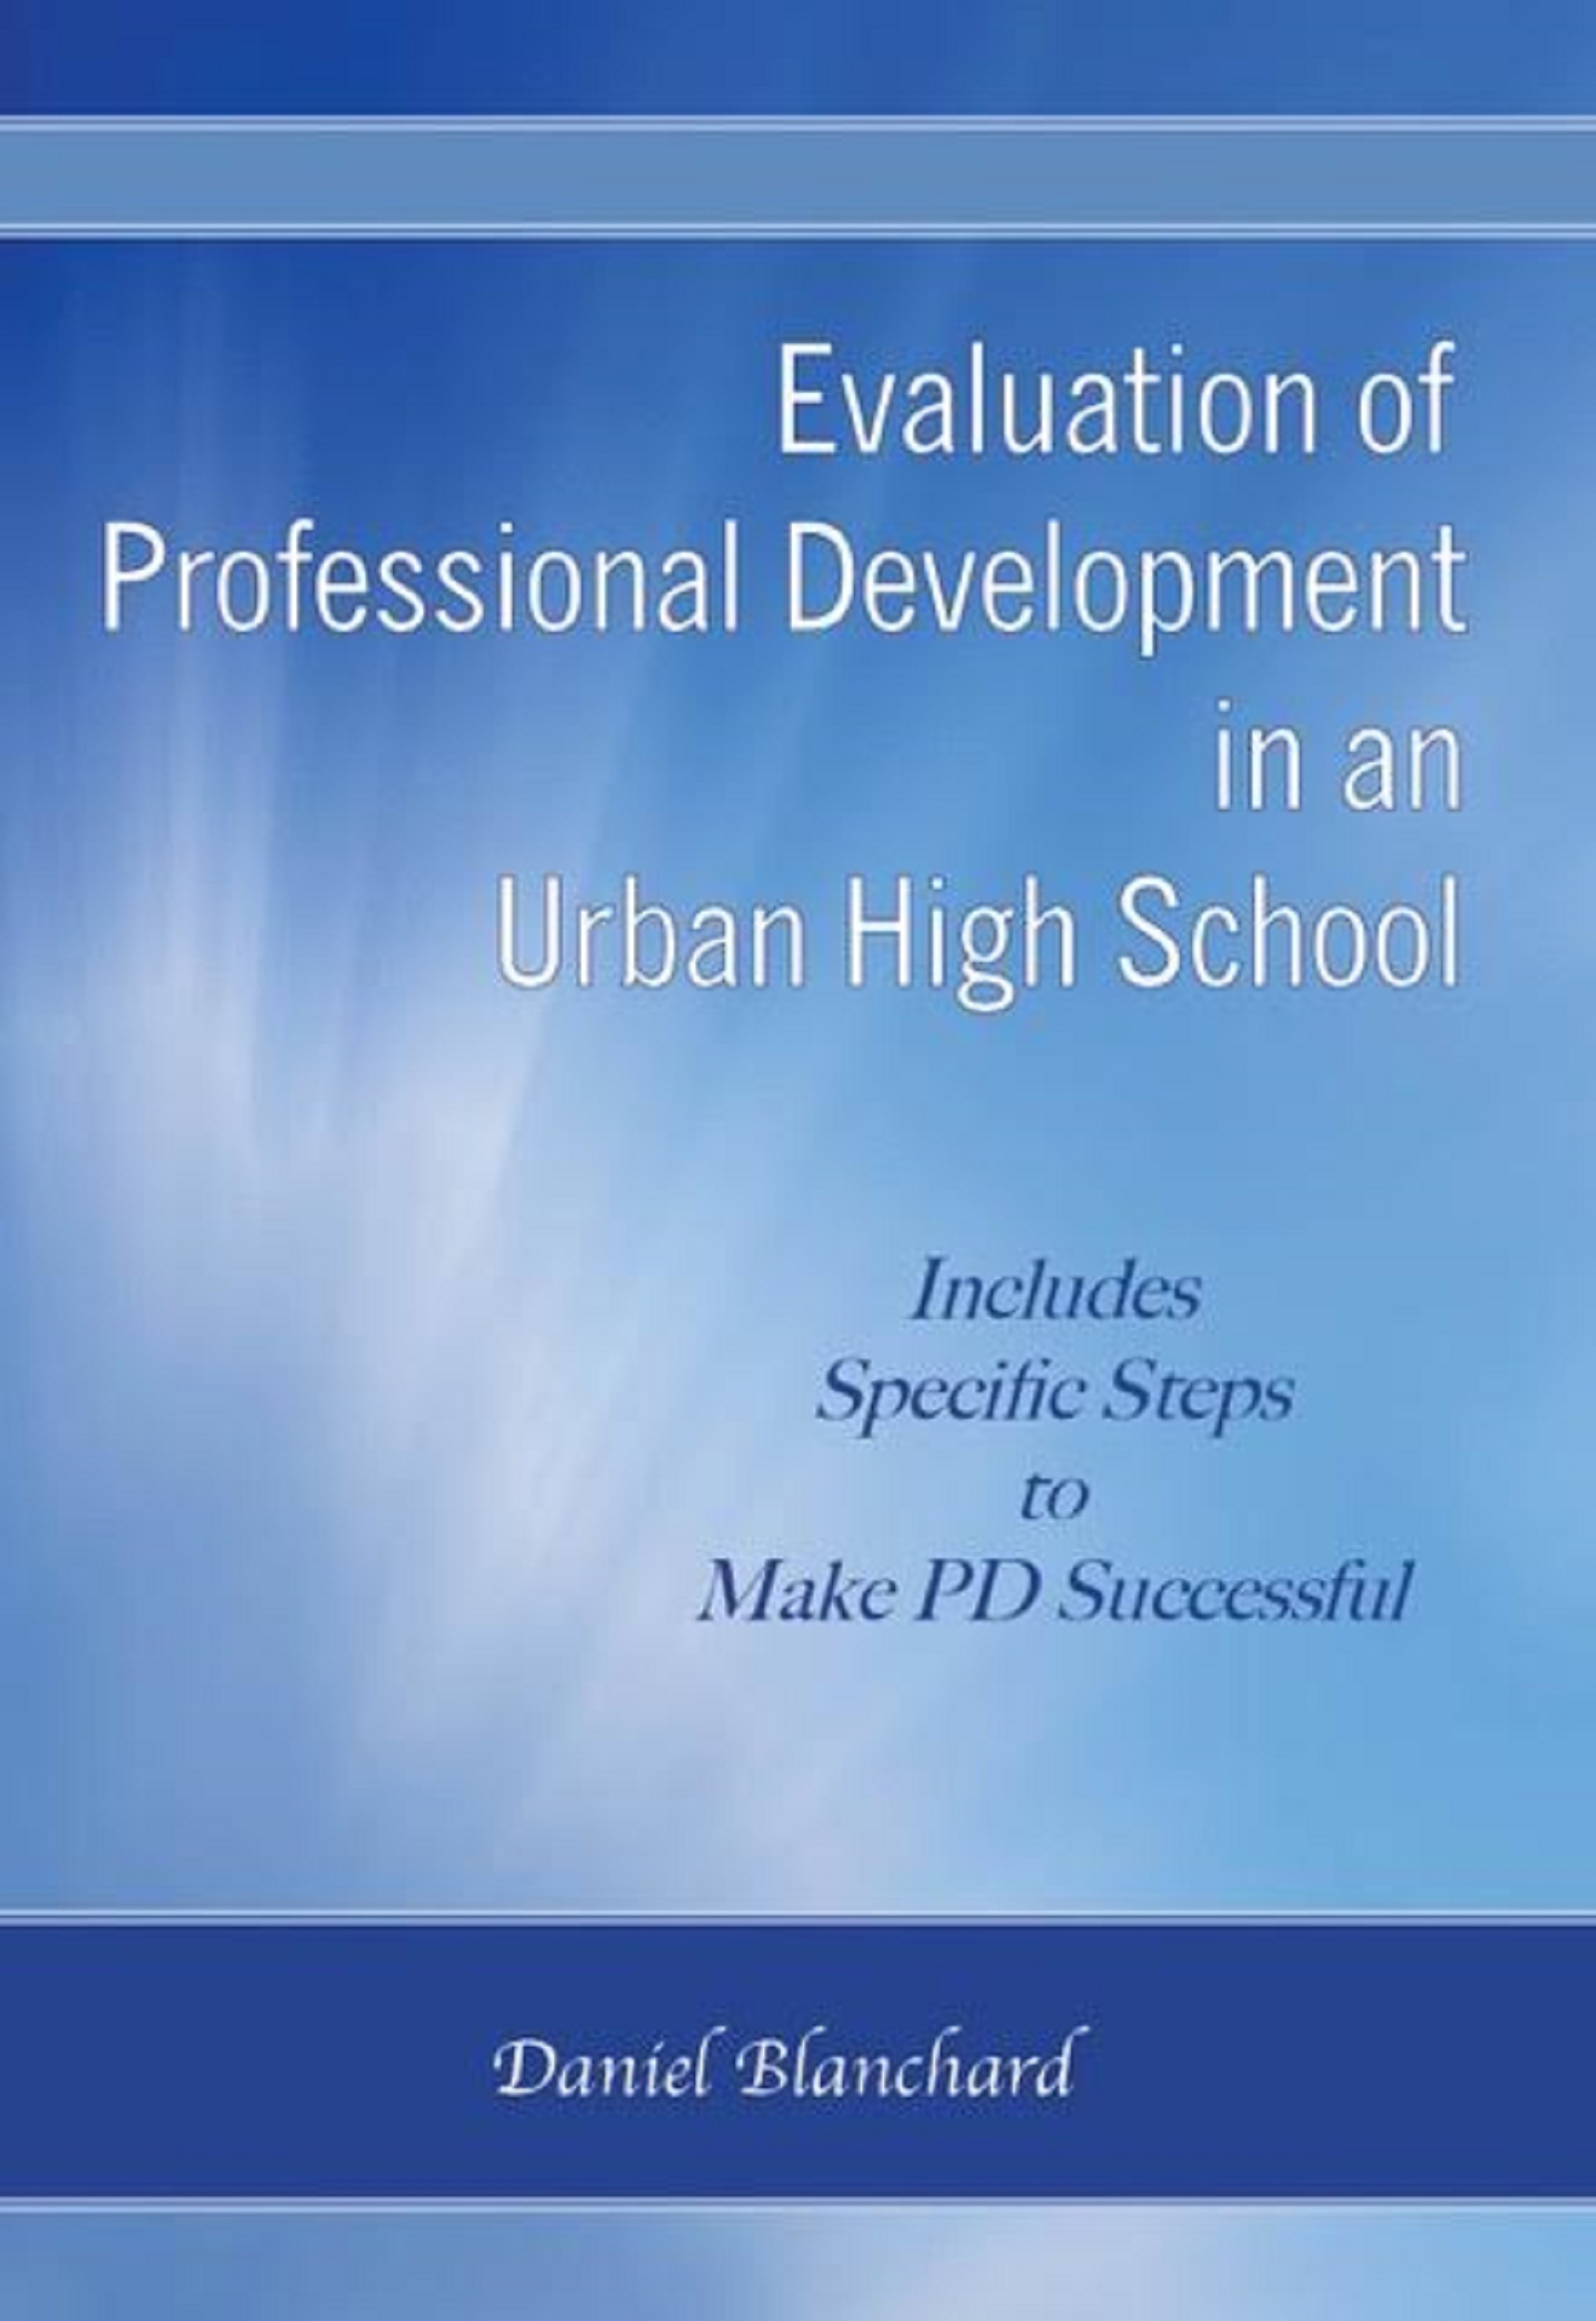 FREE: Evaluation of Professional Development in an Urban High School: Includes Specific Steps to Make PD Successful by Daniel Blanchard